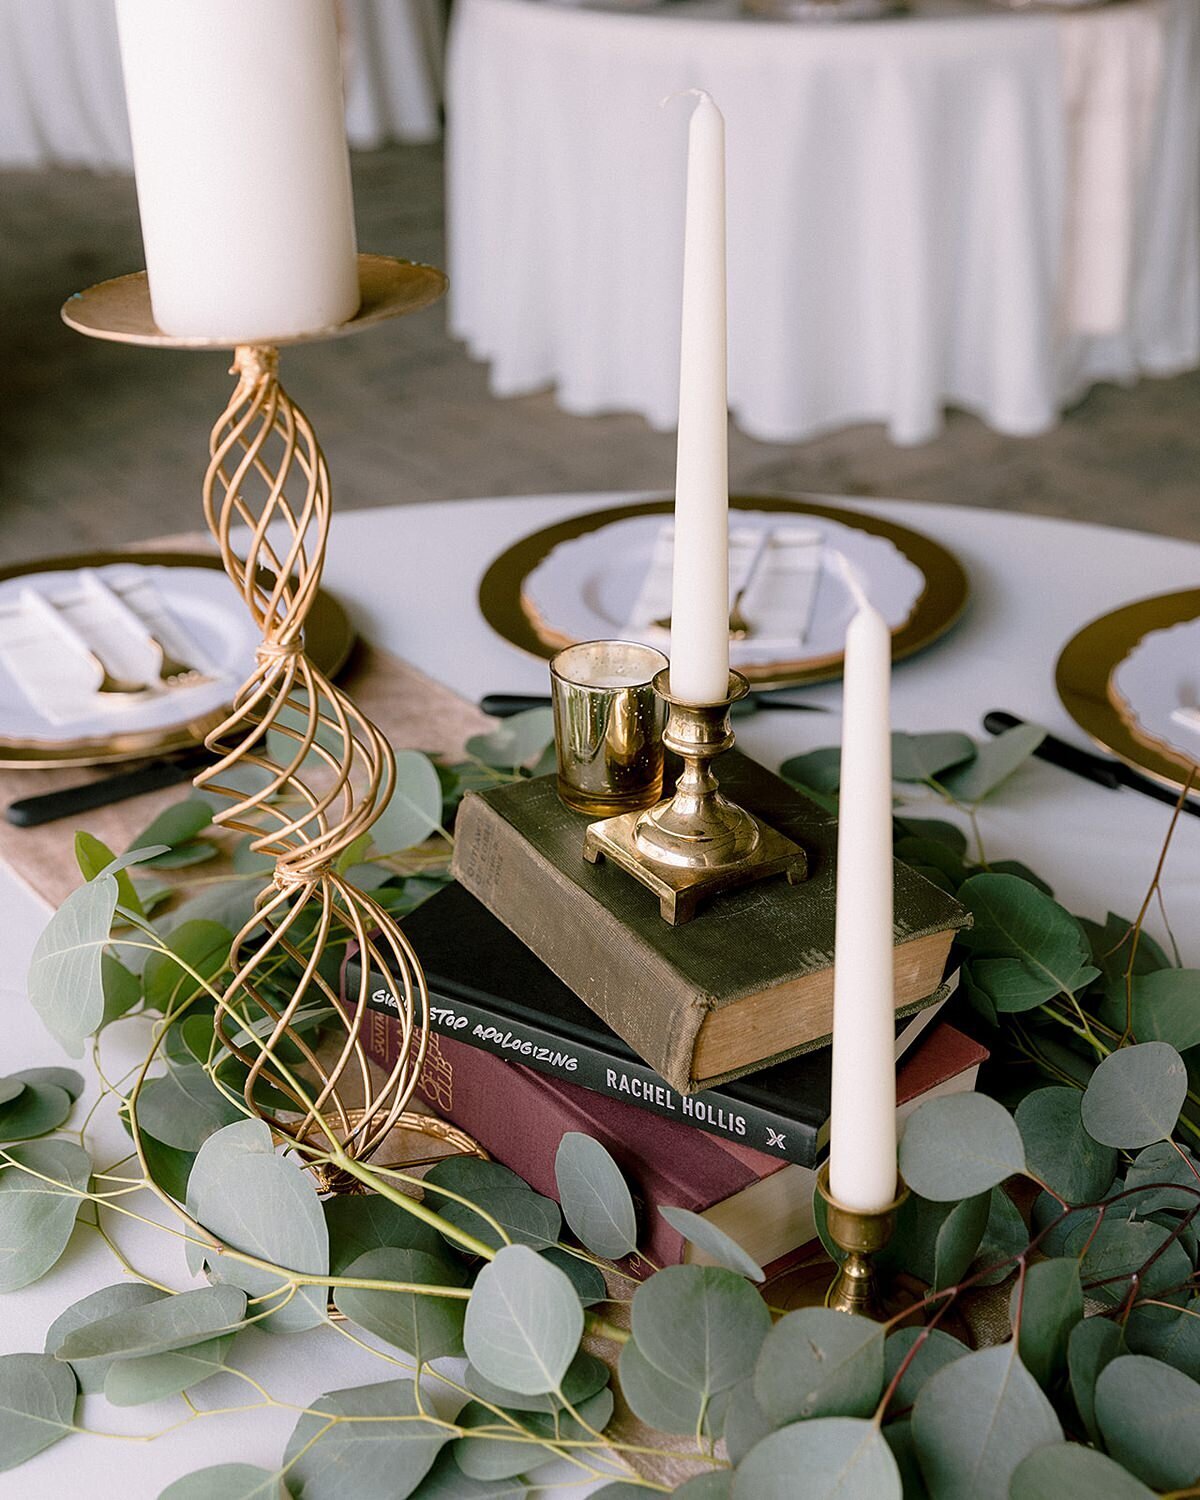 Stacks of vintage books in the center of each table topped with gold candle sticks and white table candles surrounded by silver dollar eucalyptus at a wedding reception at Ravenswood Mansion. The tables are set with gold chargers, white plates and white flatware is set at each place setting.